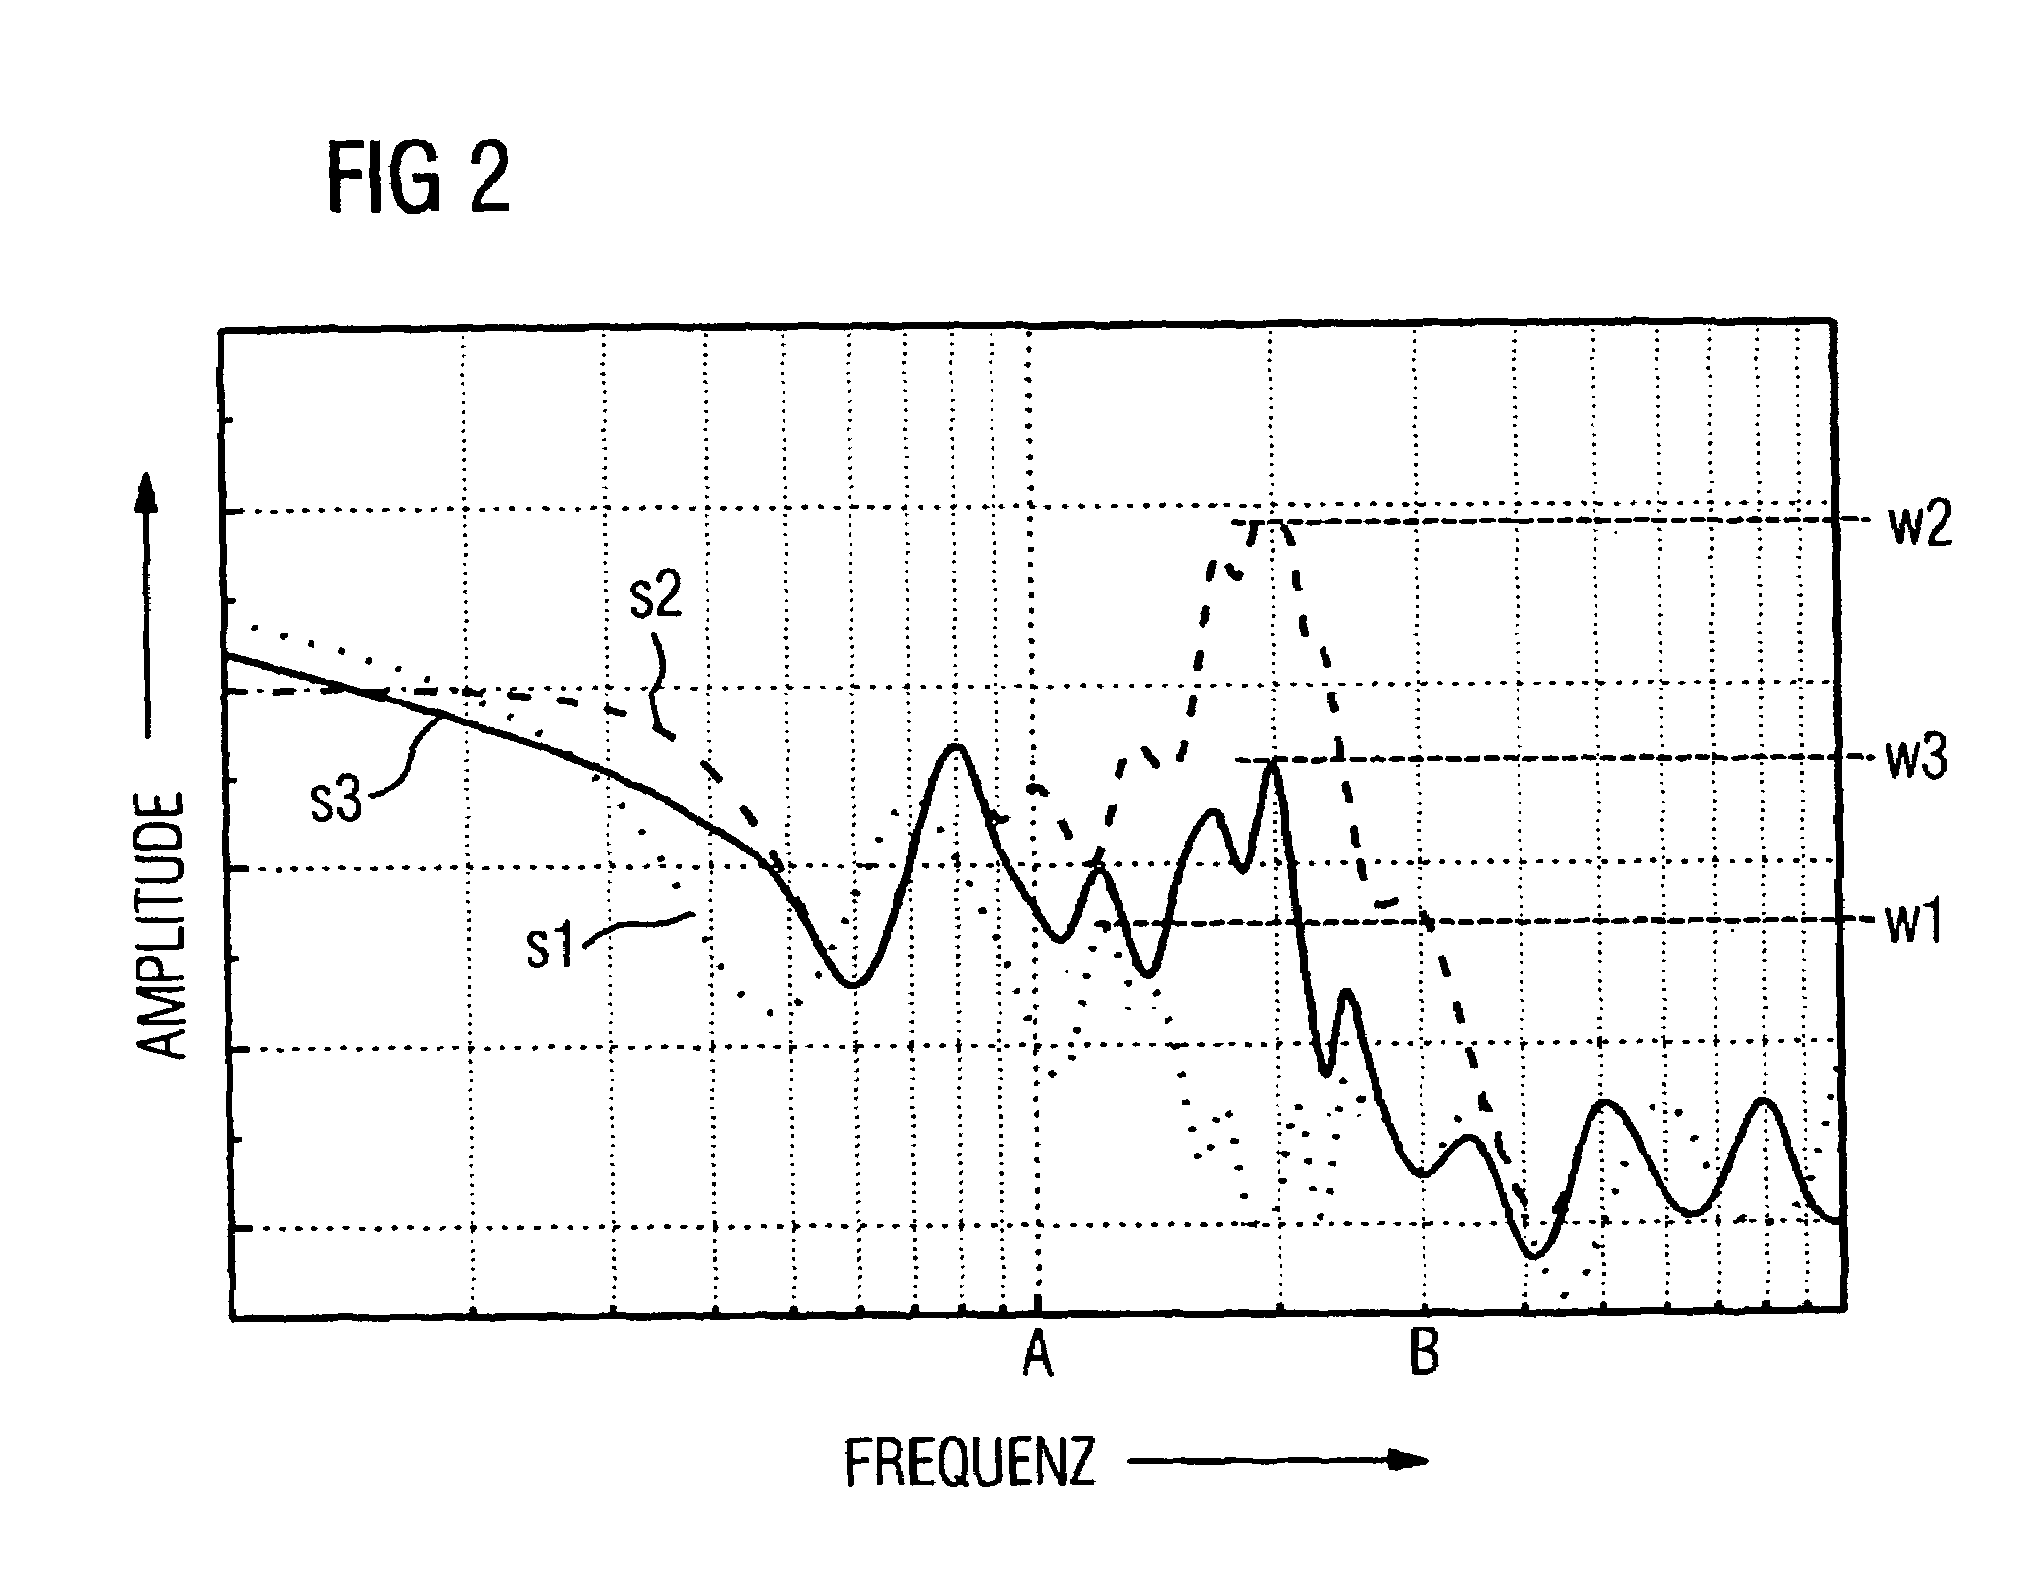 Diagnostic system and method for a valve